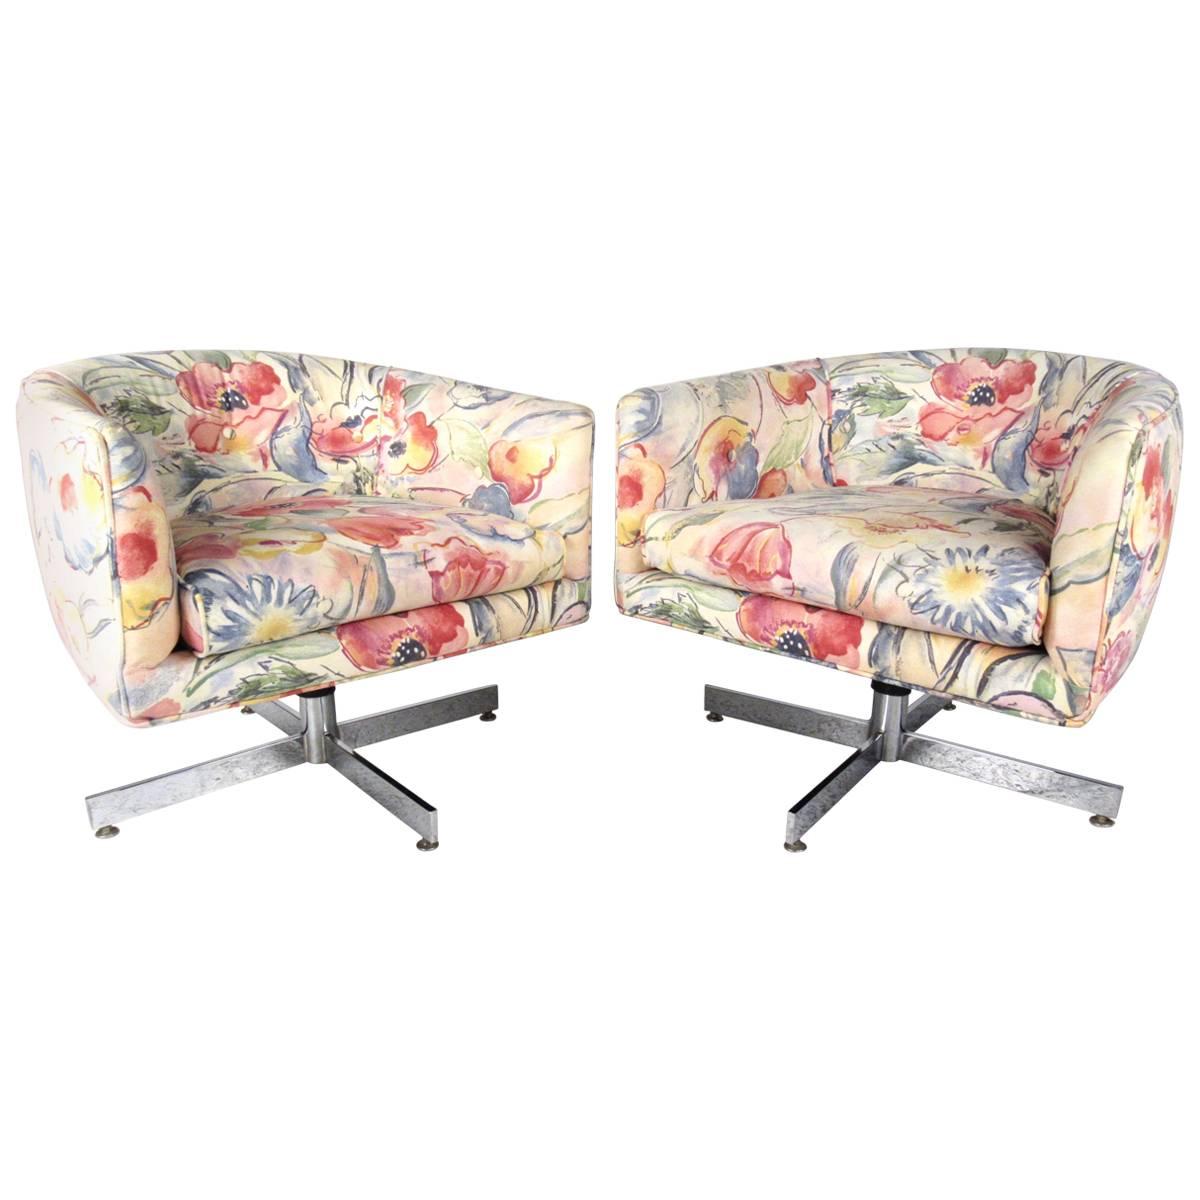 Pair of Mid-Century Milo Baughman Swivel Lounge Chairs by Thayer Coggin